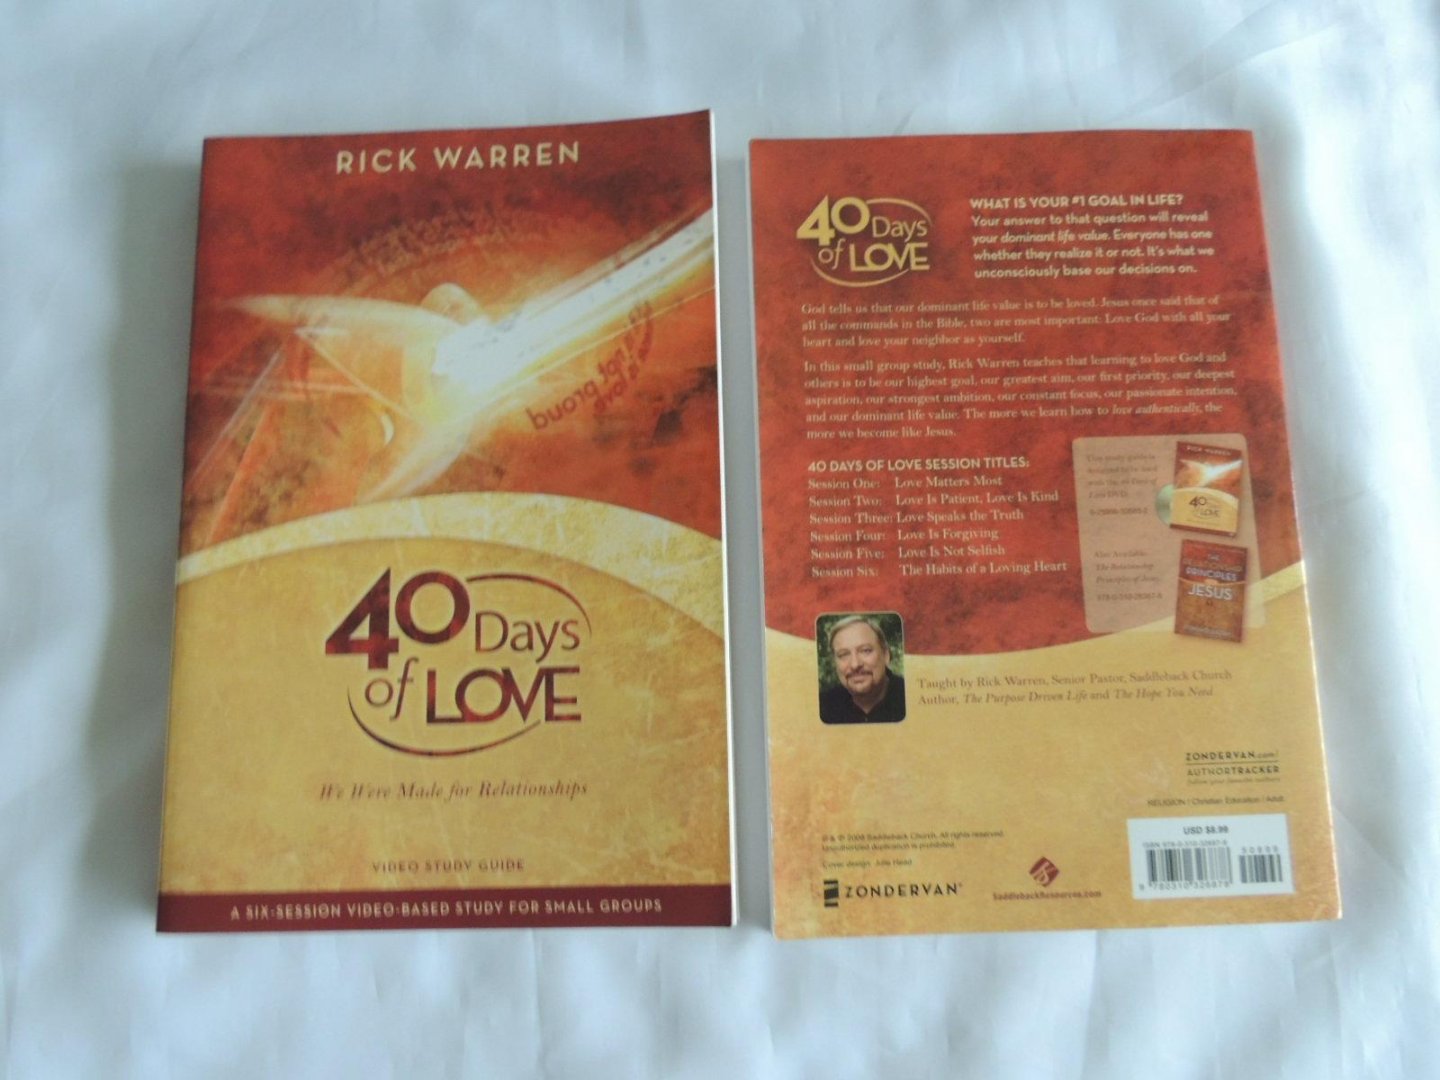 Rick Warren; Saddleback Valley Community Church (Mission Viejo, Calif.) - 40 days of love : we were made for relationships - with DVD